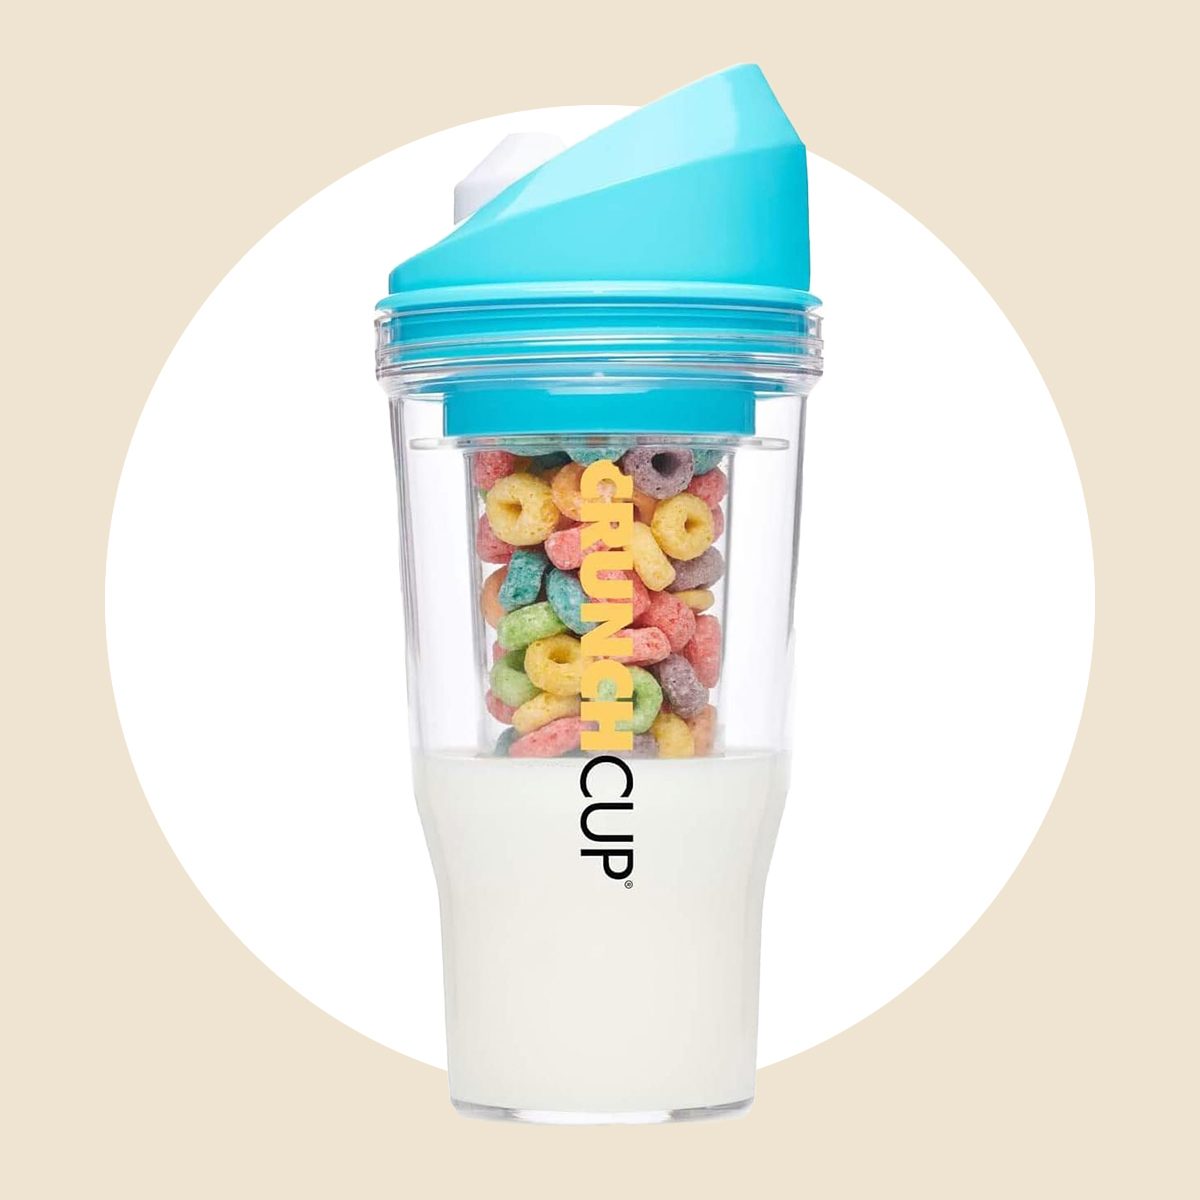 Crunchcup A Portable Plastic Cereal Cup